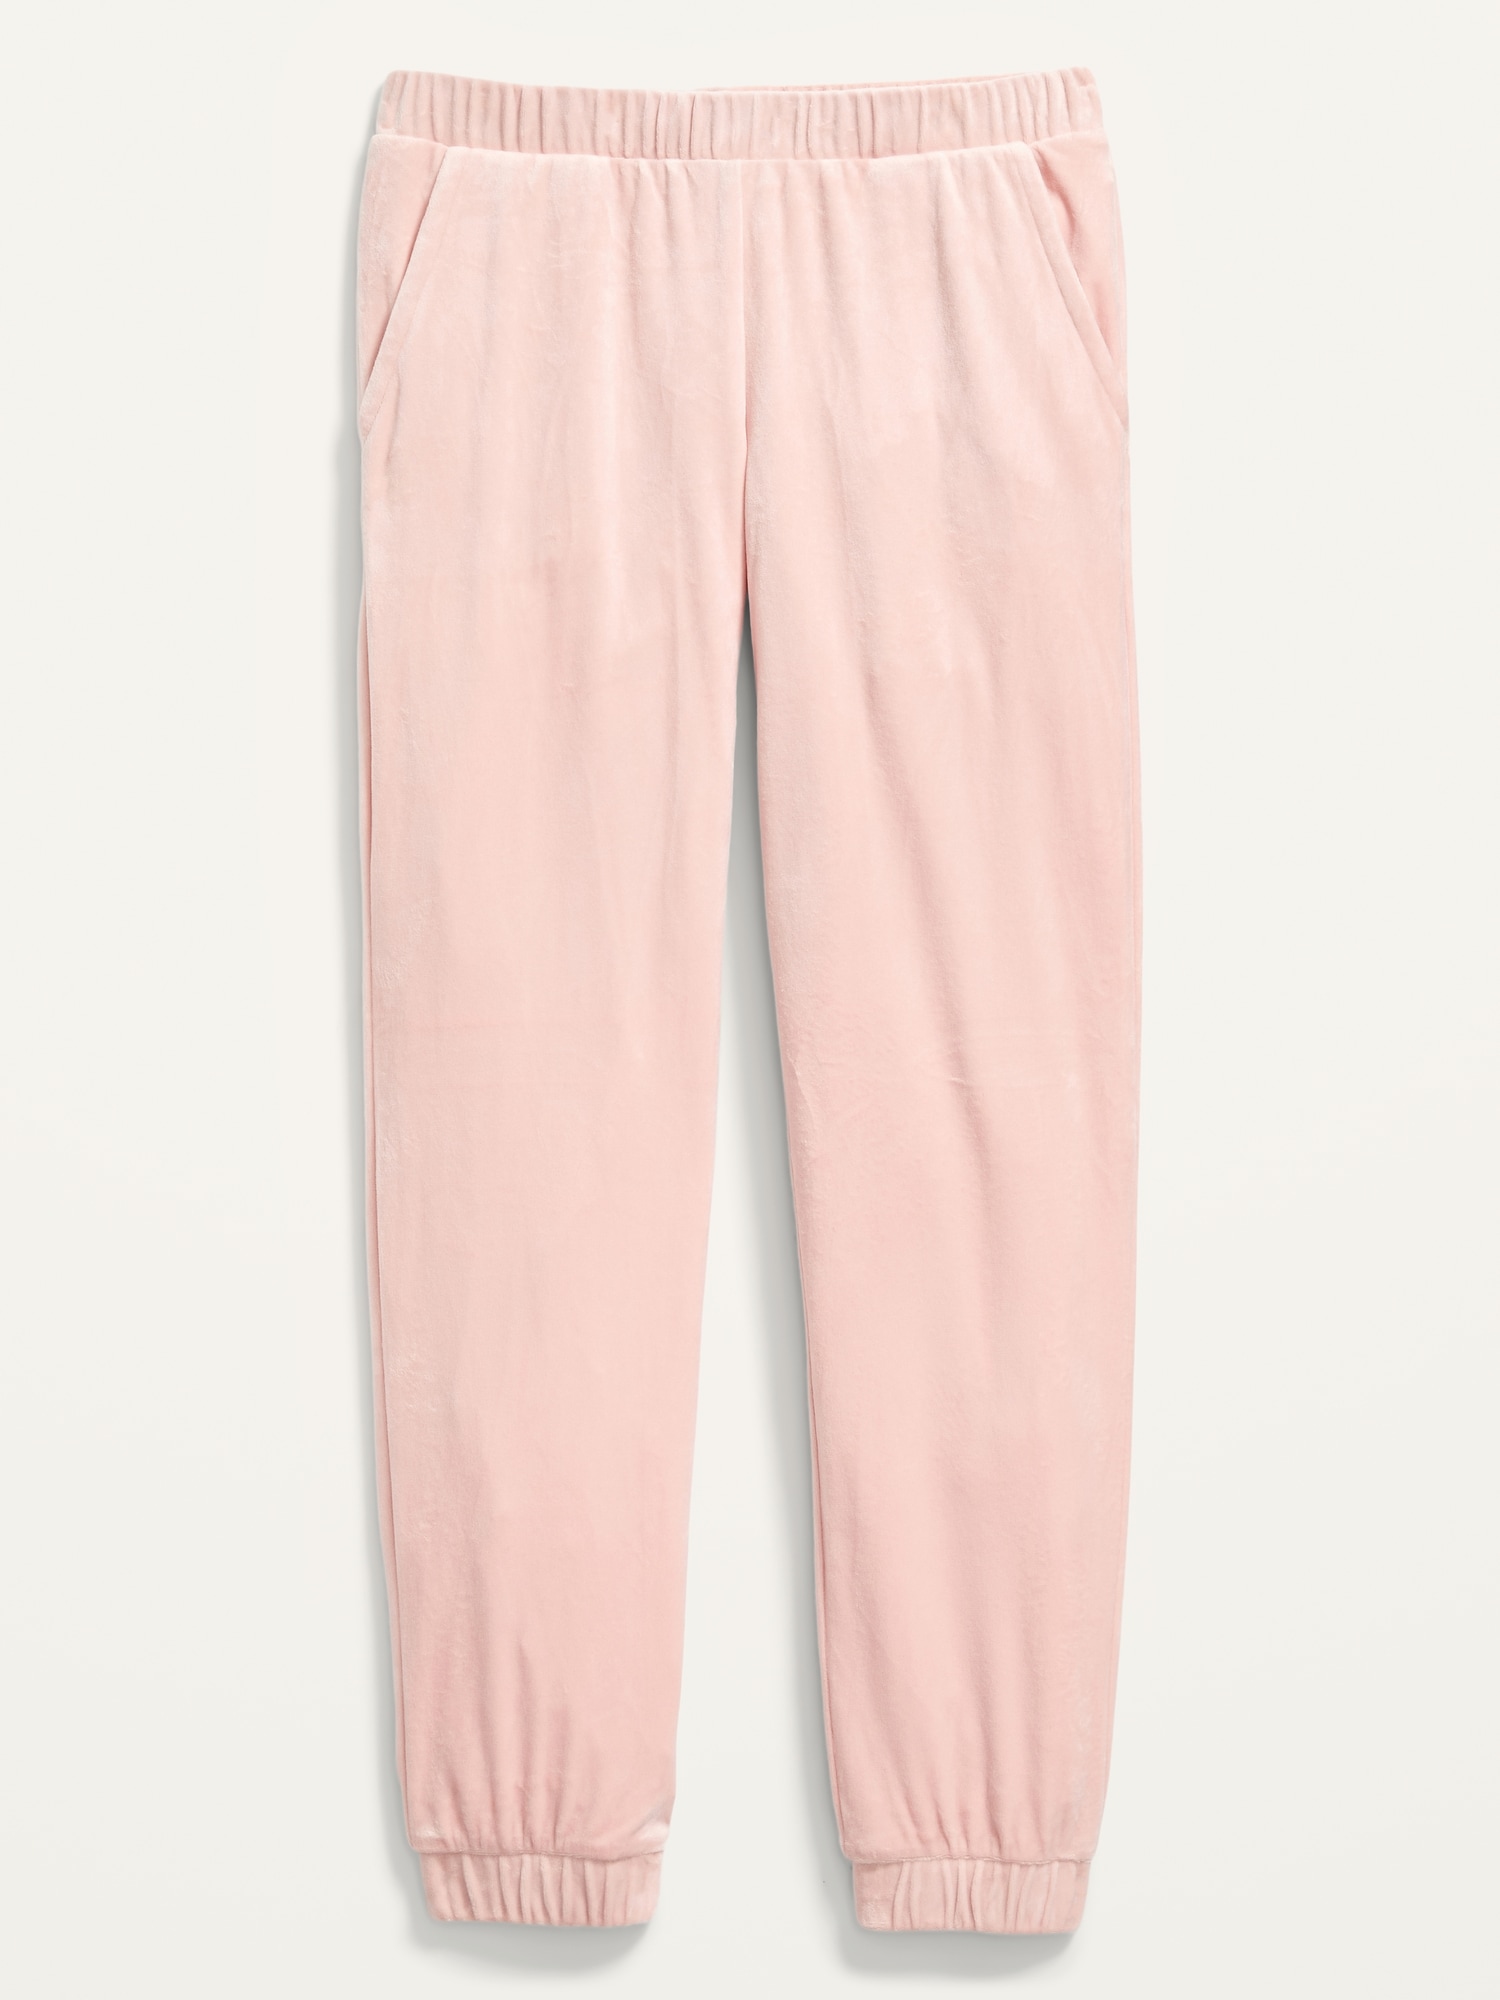 Cozy Velour Jogger Sweatpants for Girls | Old Navy